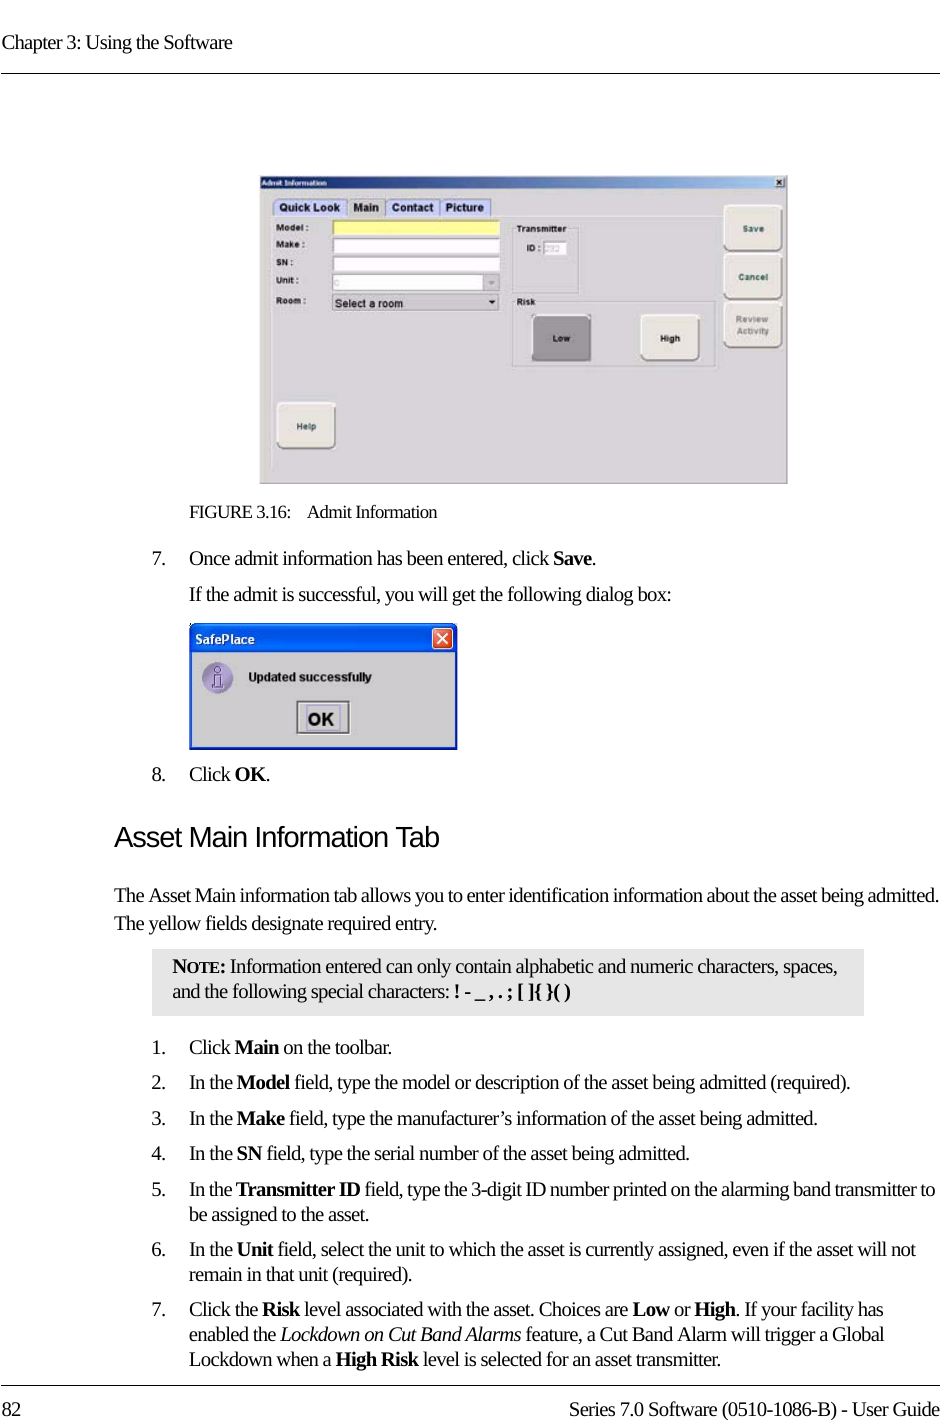 Chapter 3: Using the Software82 Series 7.0 Software (0510-1086-B) - User GuideFIGURE 3.16:    Admit Information7.    Once admit information has been entered, click Save.If the admit is successful, you will get the following dialog box:8.    Click OK. Asset Main Information TabThe Asset Main information tab allows you to enter identification information about the asset being admitted. The yellow fields designate required entry.1.    Click Main on the toolbar.2.    In the Model field, type the model or description of the asset being admitted (required). 3.    In the Make field, type the manufacturer’s information of the asset being admitted.4.    In the SN field, type the serial number of the asset being admitted.5.    In the Transmitter ID field, type the 3-digit ID number printed on the alarming band transmitter to be assigned to the asset.6.    In the Unit field, select the unit to which the asset is currently assigned, even if the asset will not remain in that unit (required).7.    Click the Risk level associated with the asset. Choices are Low or High. If your facility has enabled the Lockdown on Cut Band Alarms feature, a Cut Band Alarm will trigger a Global Lockdown when a High Risk level is selected for an asset transmitter.NOTE: Information entered can only contain alphabetic and numeric characters, spaces, and the following special characters: ! - _ , . ; [ ]{ }( )